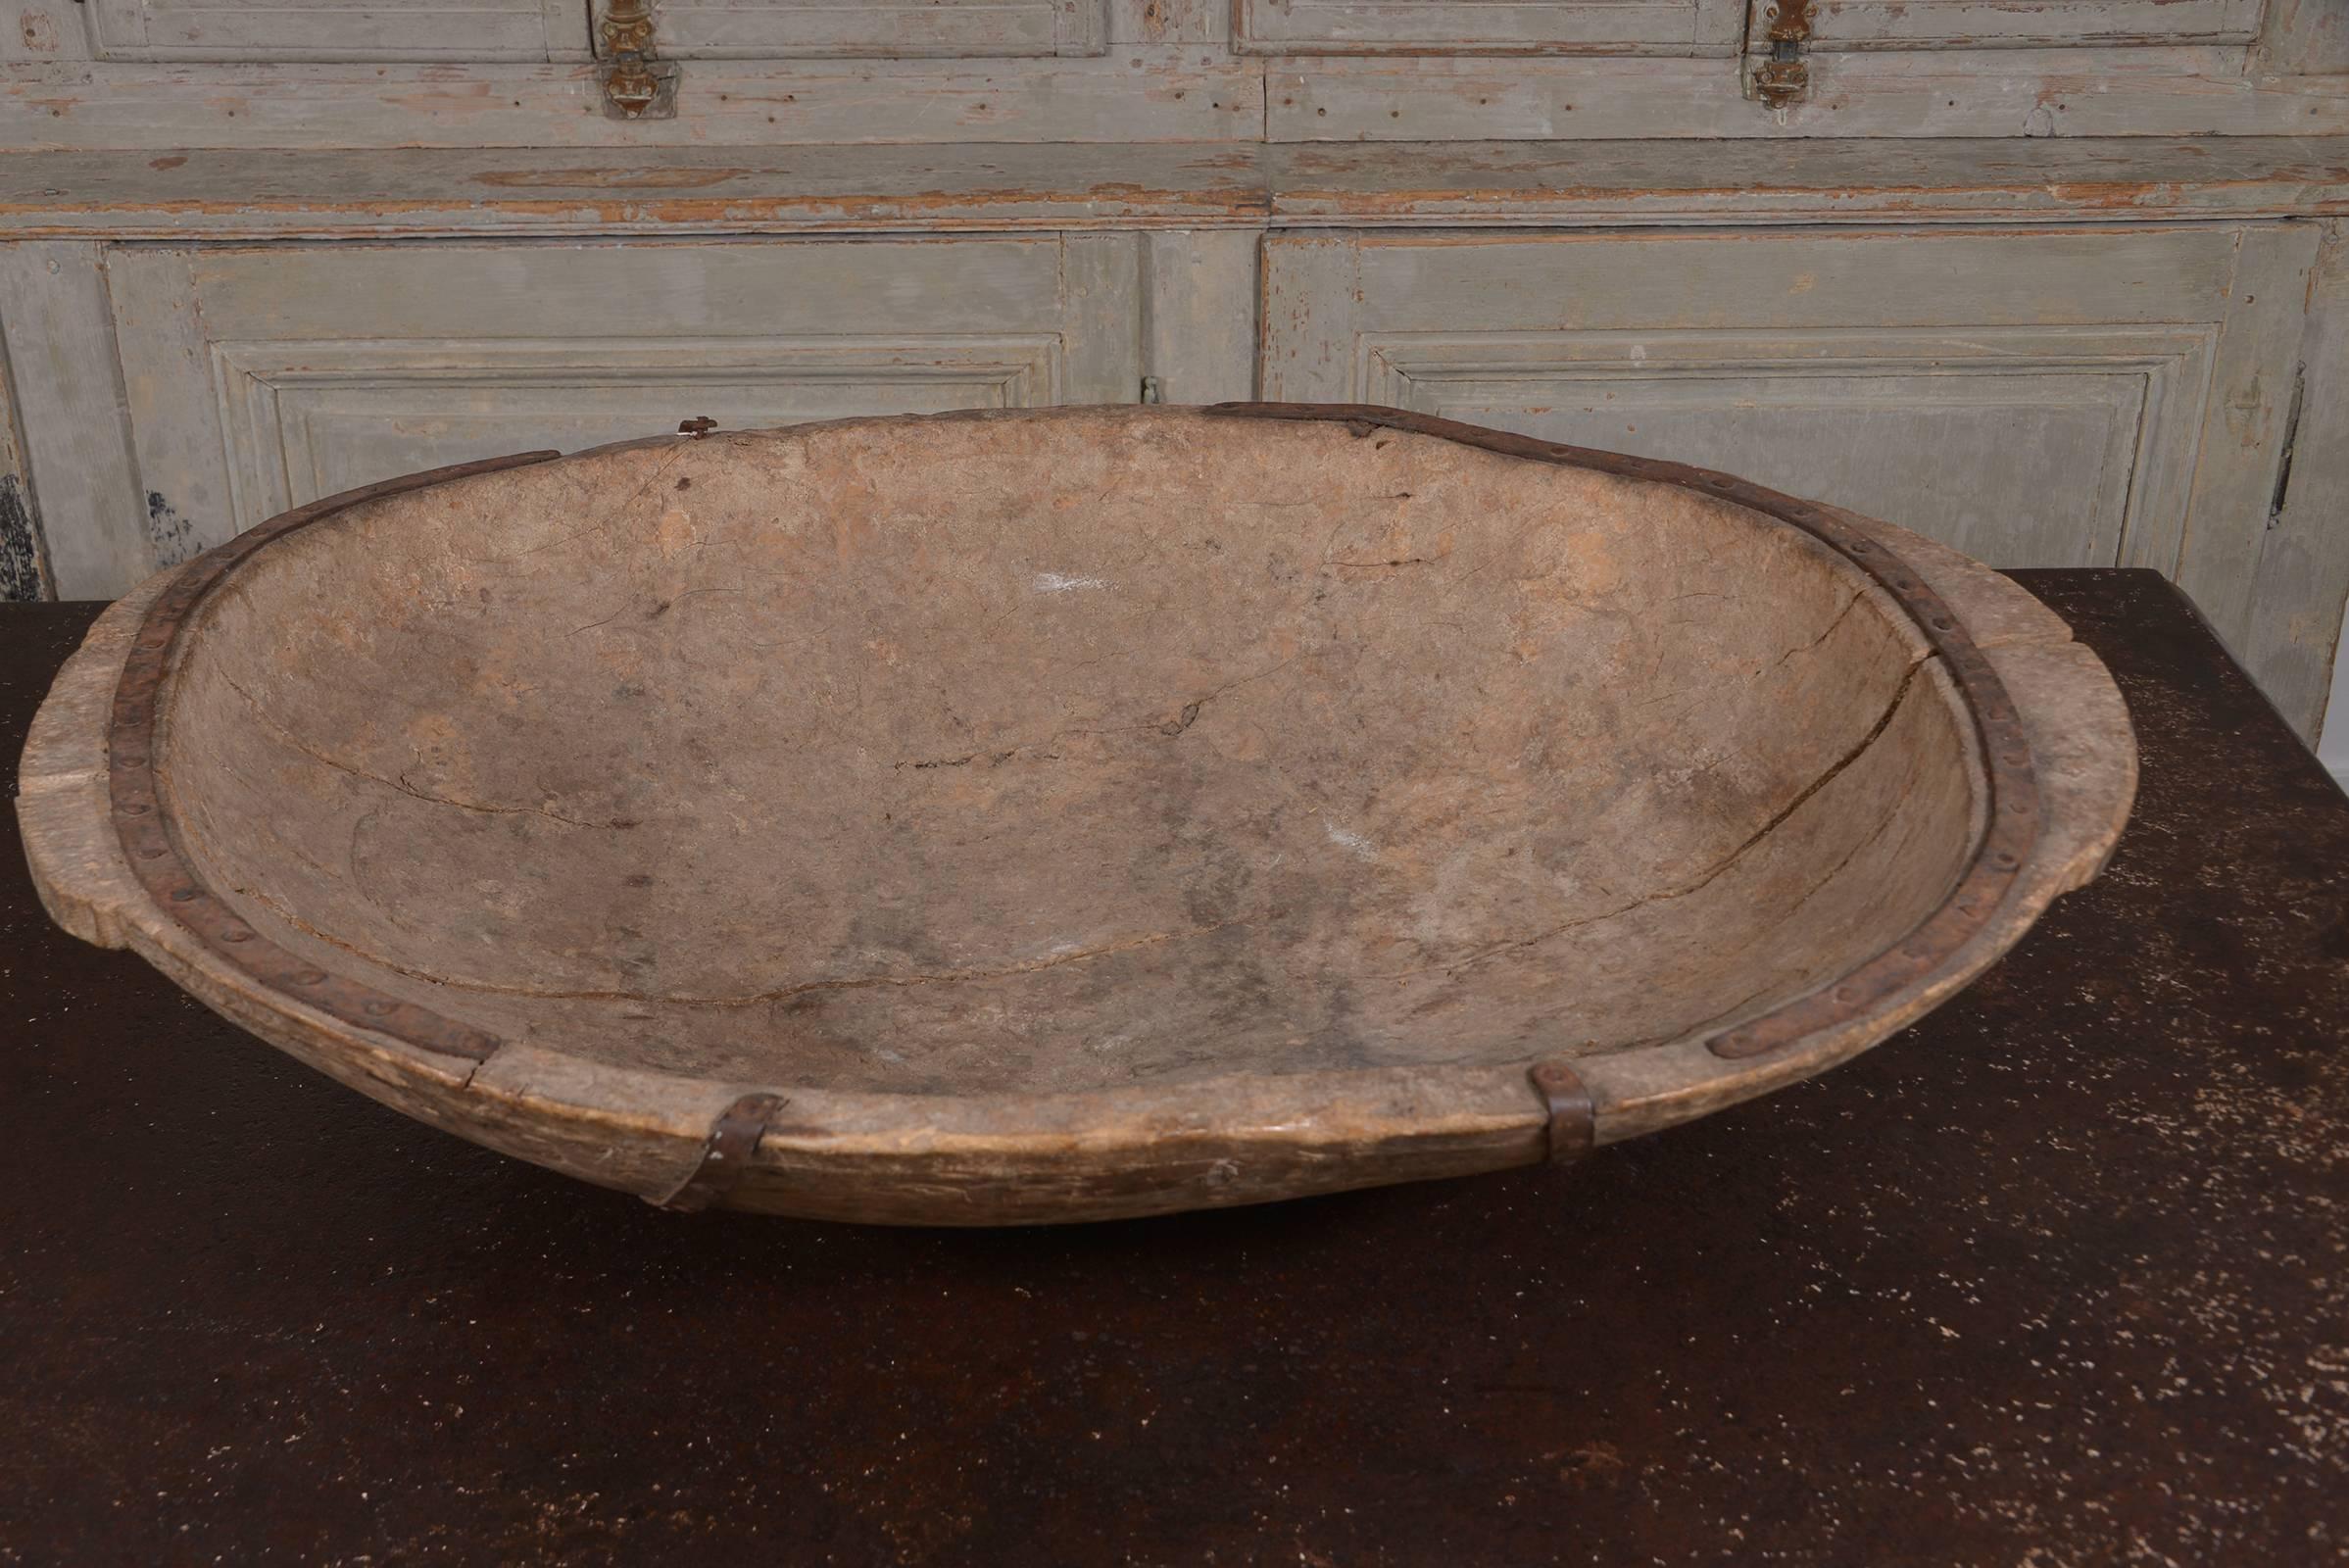 19th century French dough bowl, amazing character and charming imperfections.